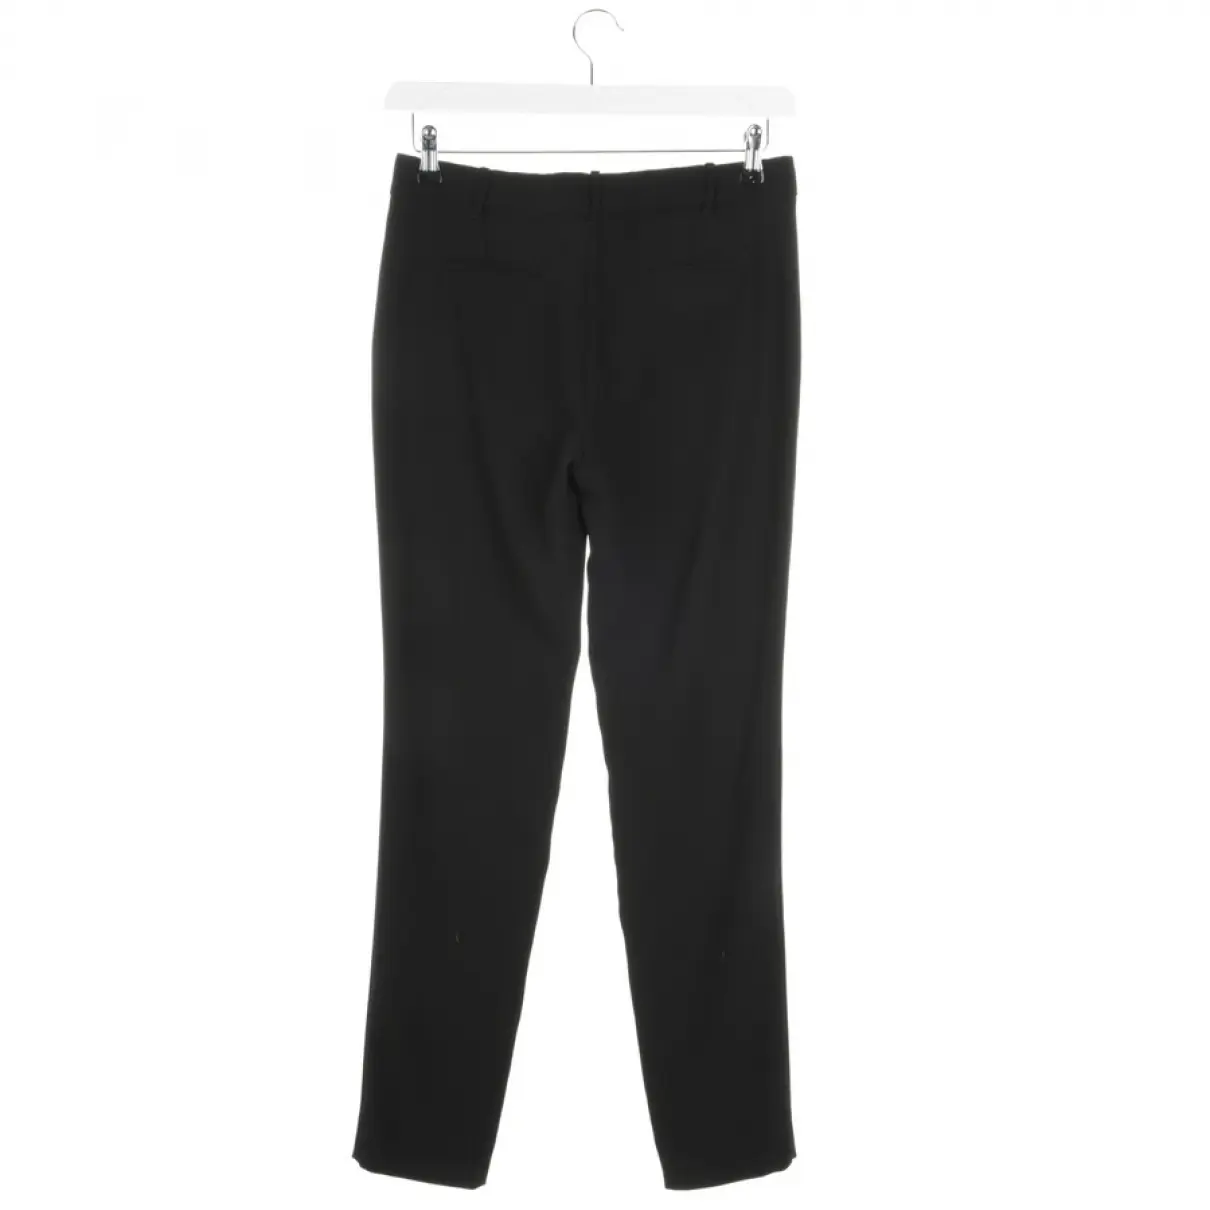 Buy SLY010 Trousers online